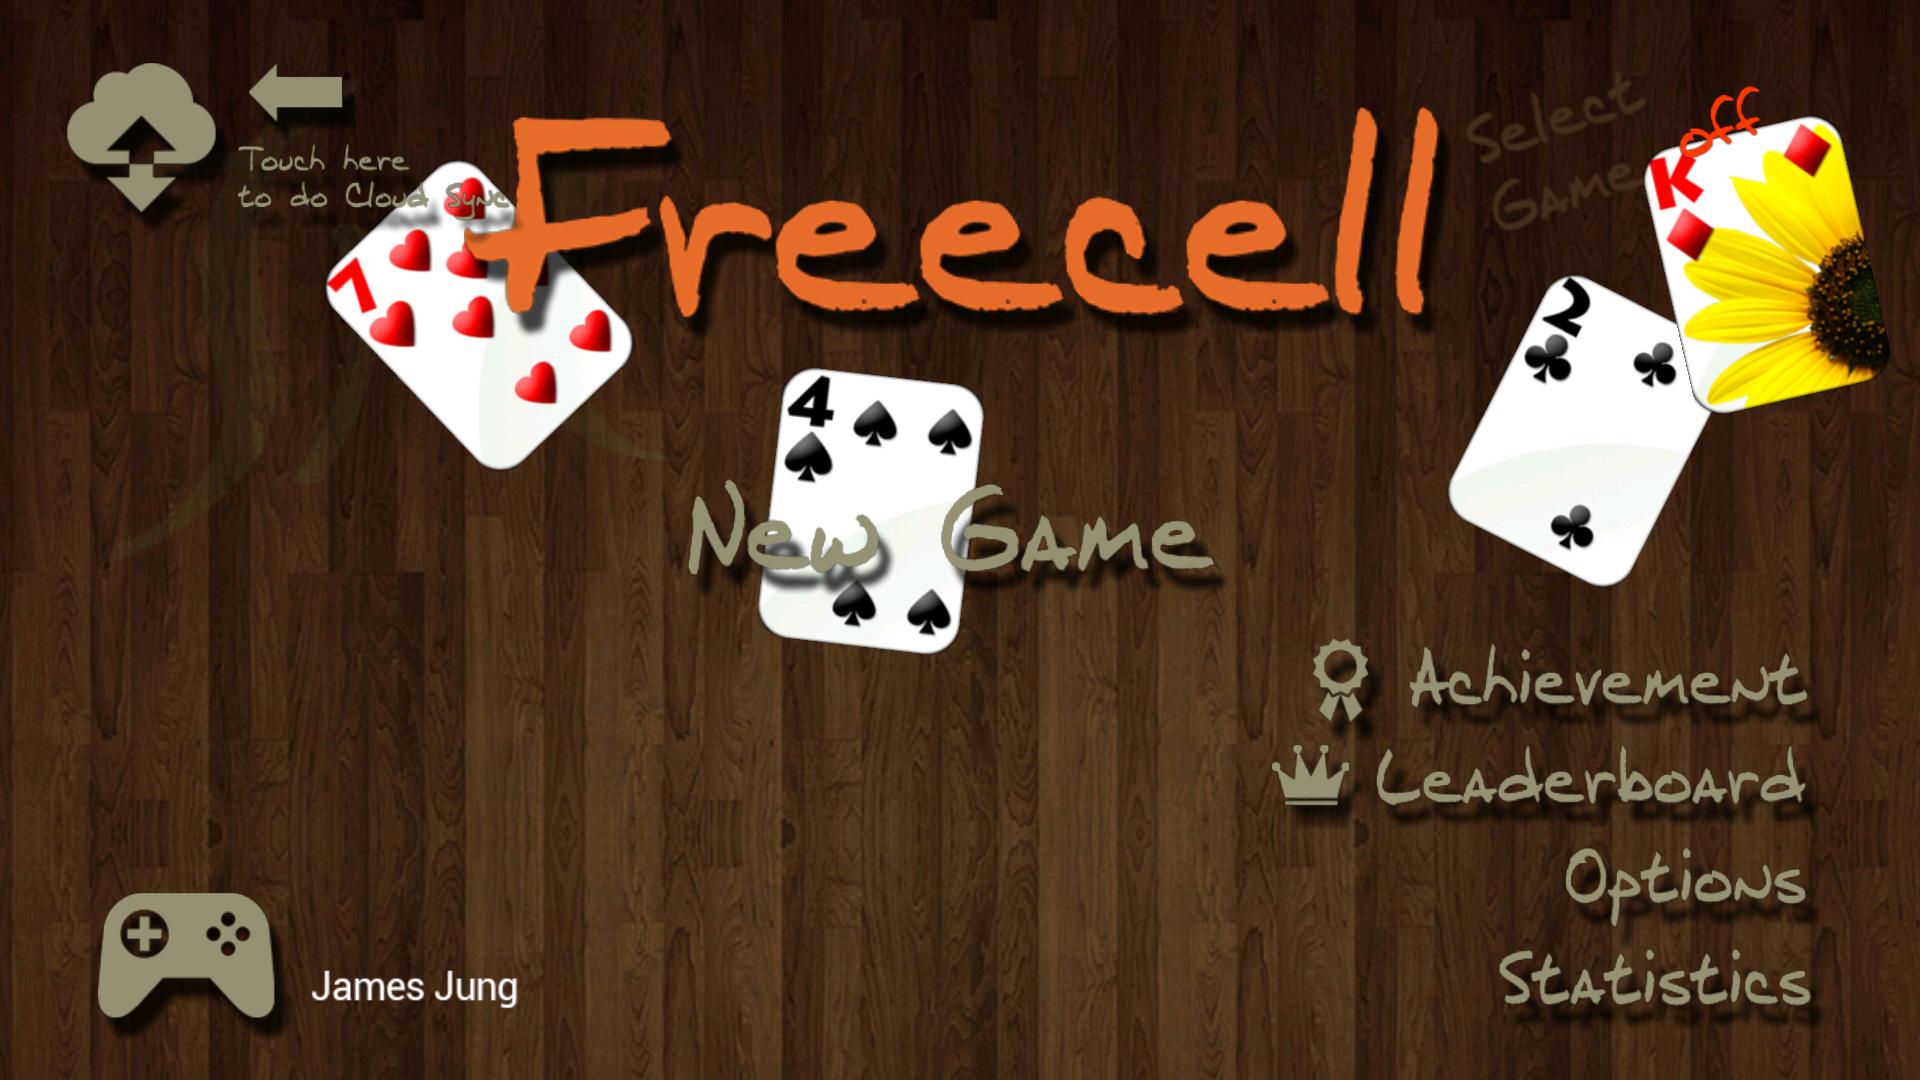 Freecell in Nature